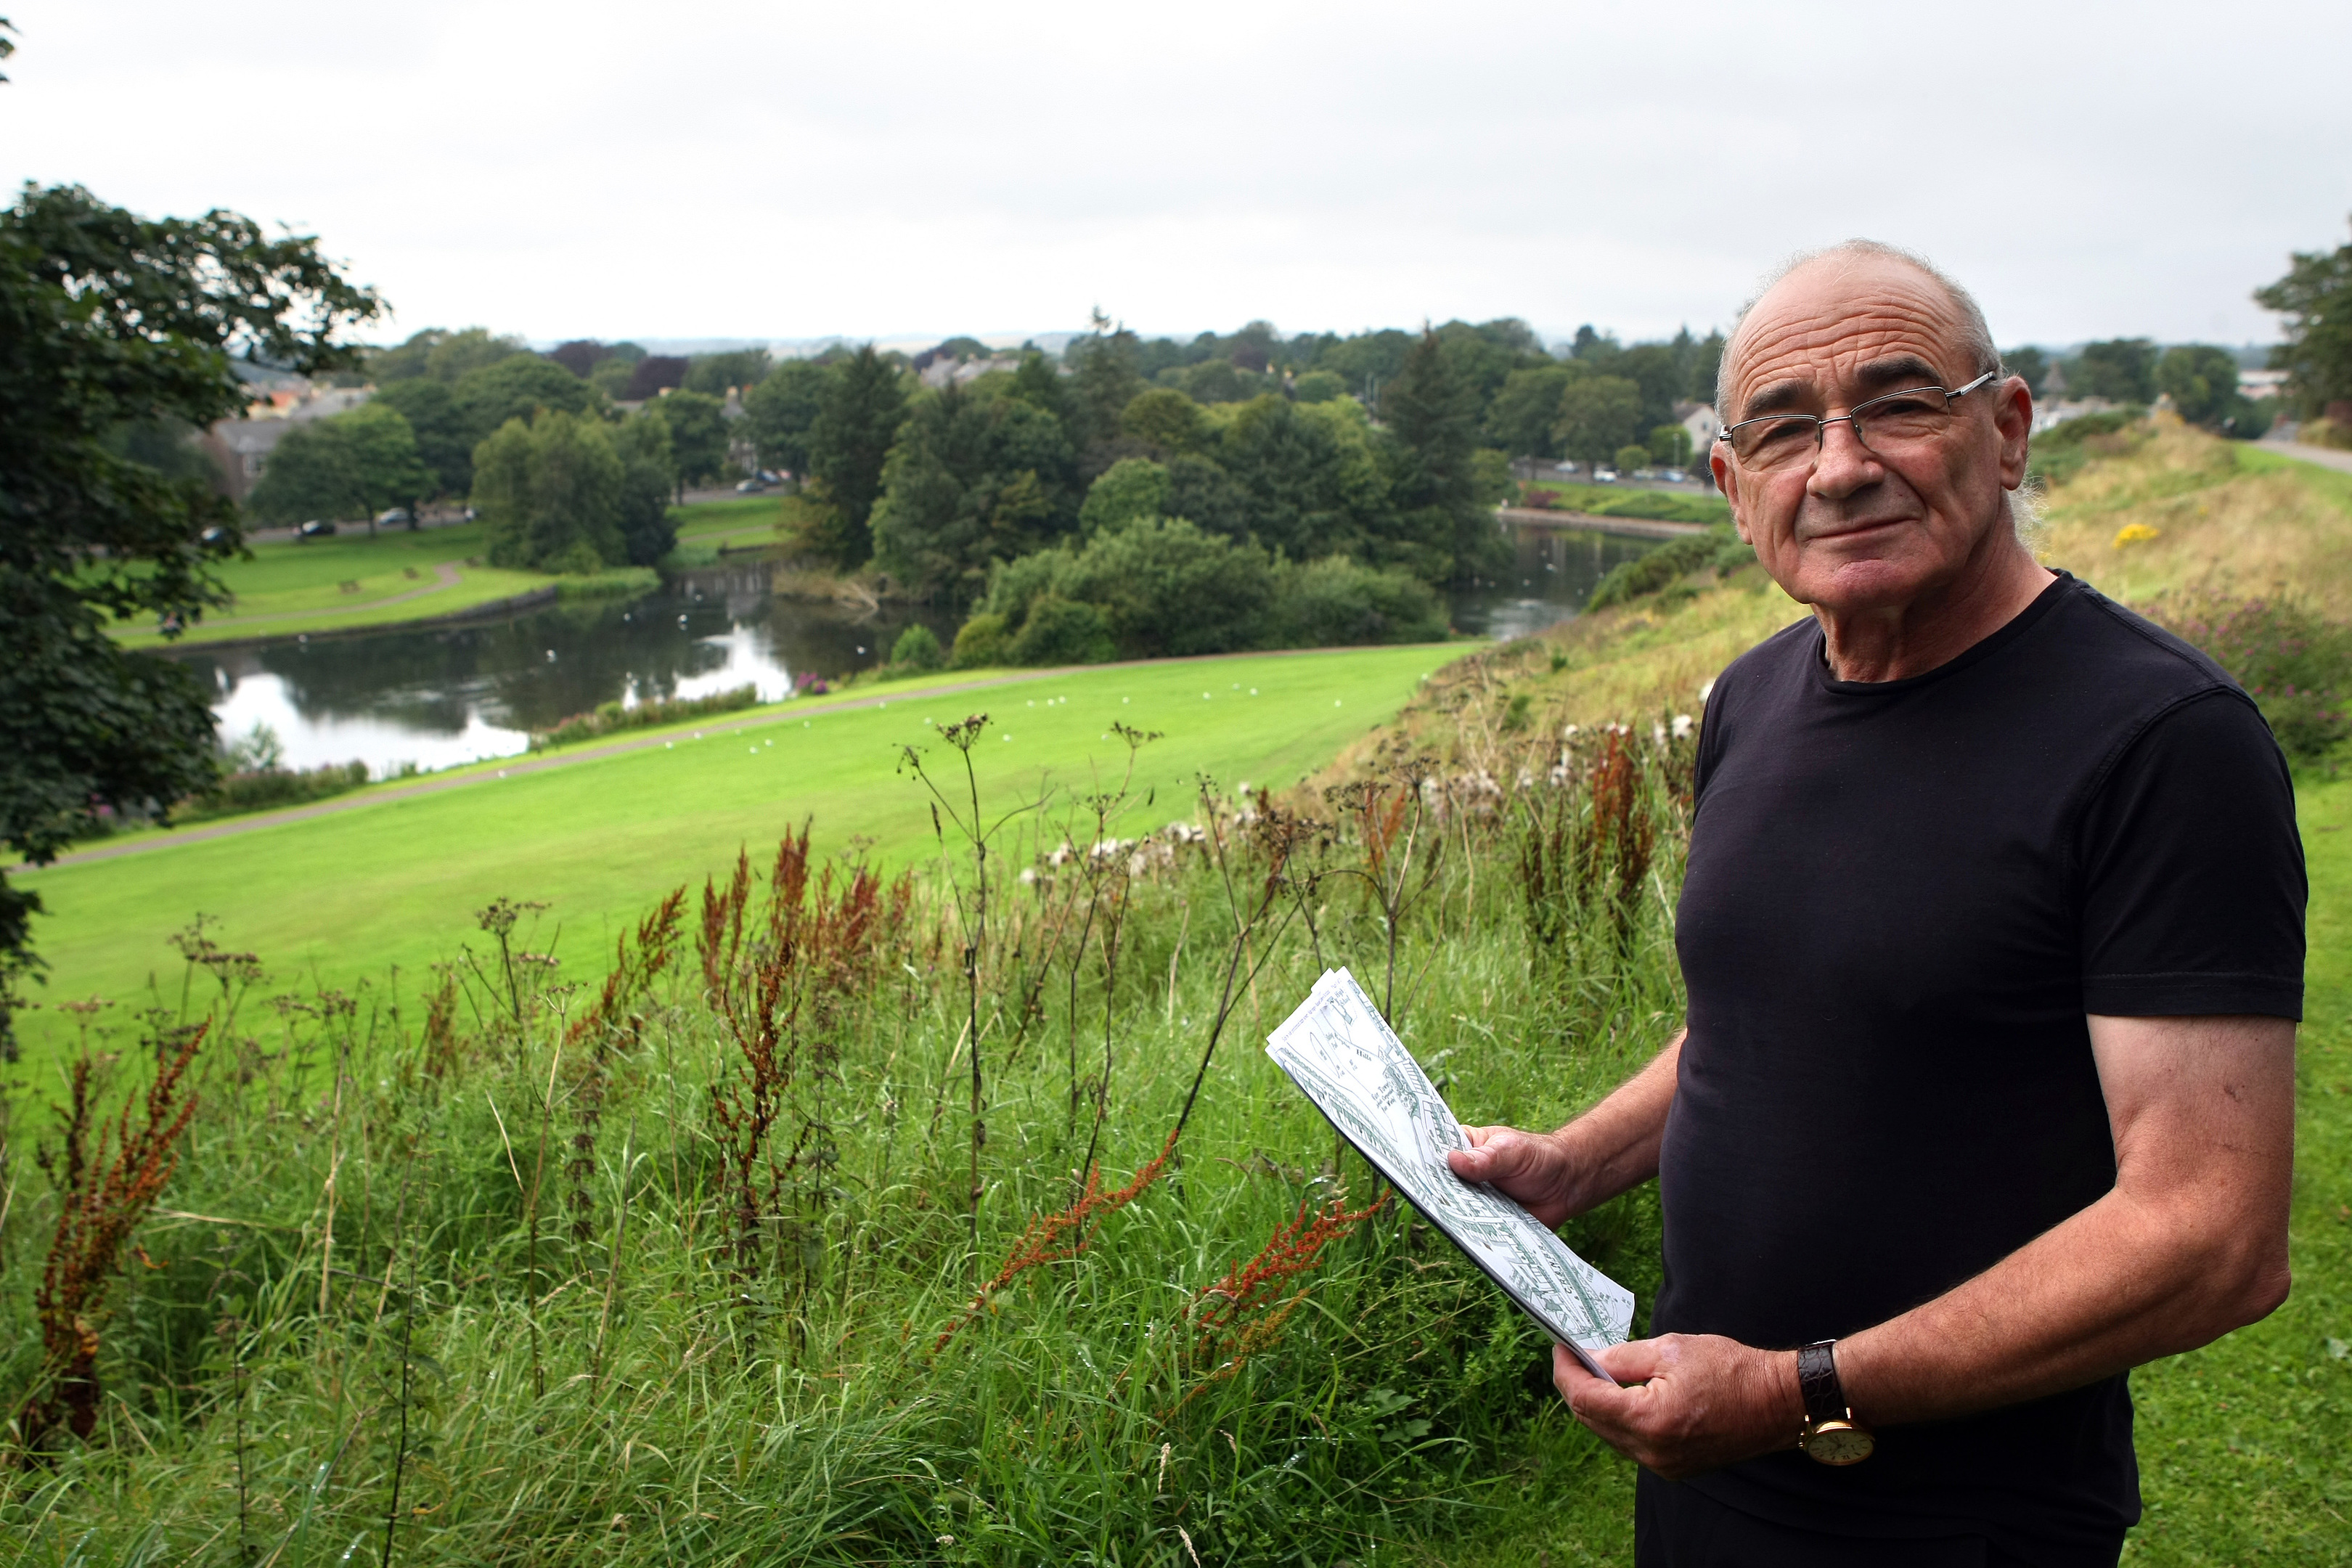 Former town planner George Park looking at the pond.